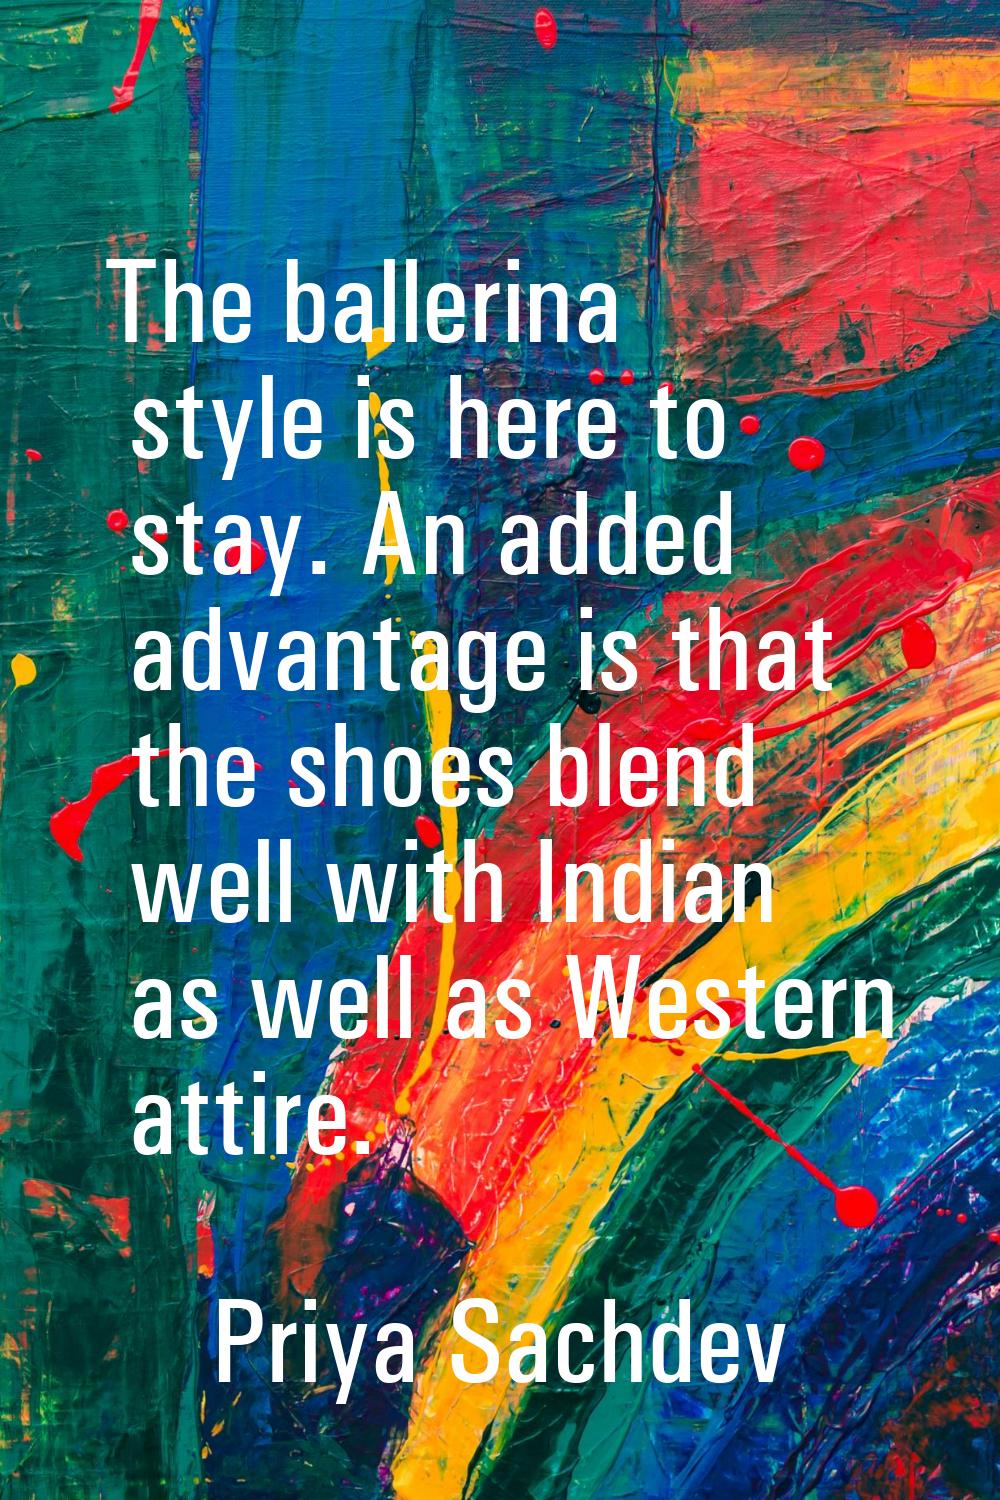 The ballerina style is here to stay. An added advantage is that the shoes blend well with Indian as